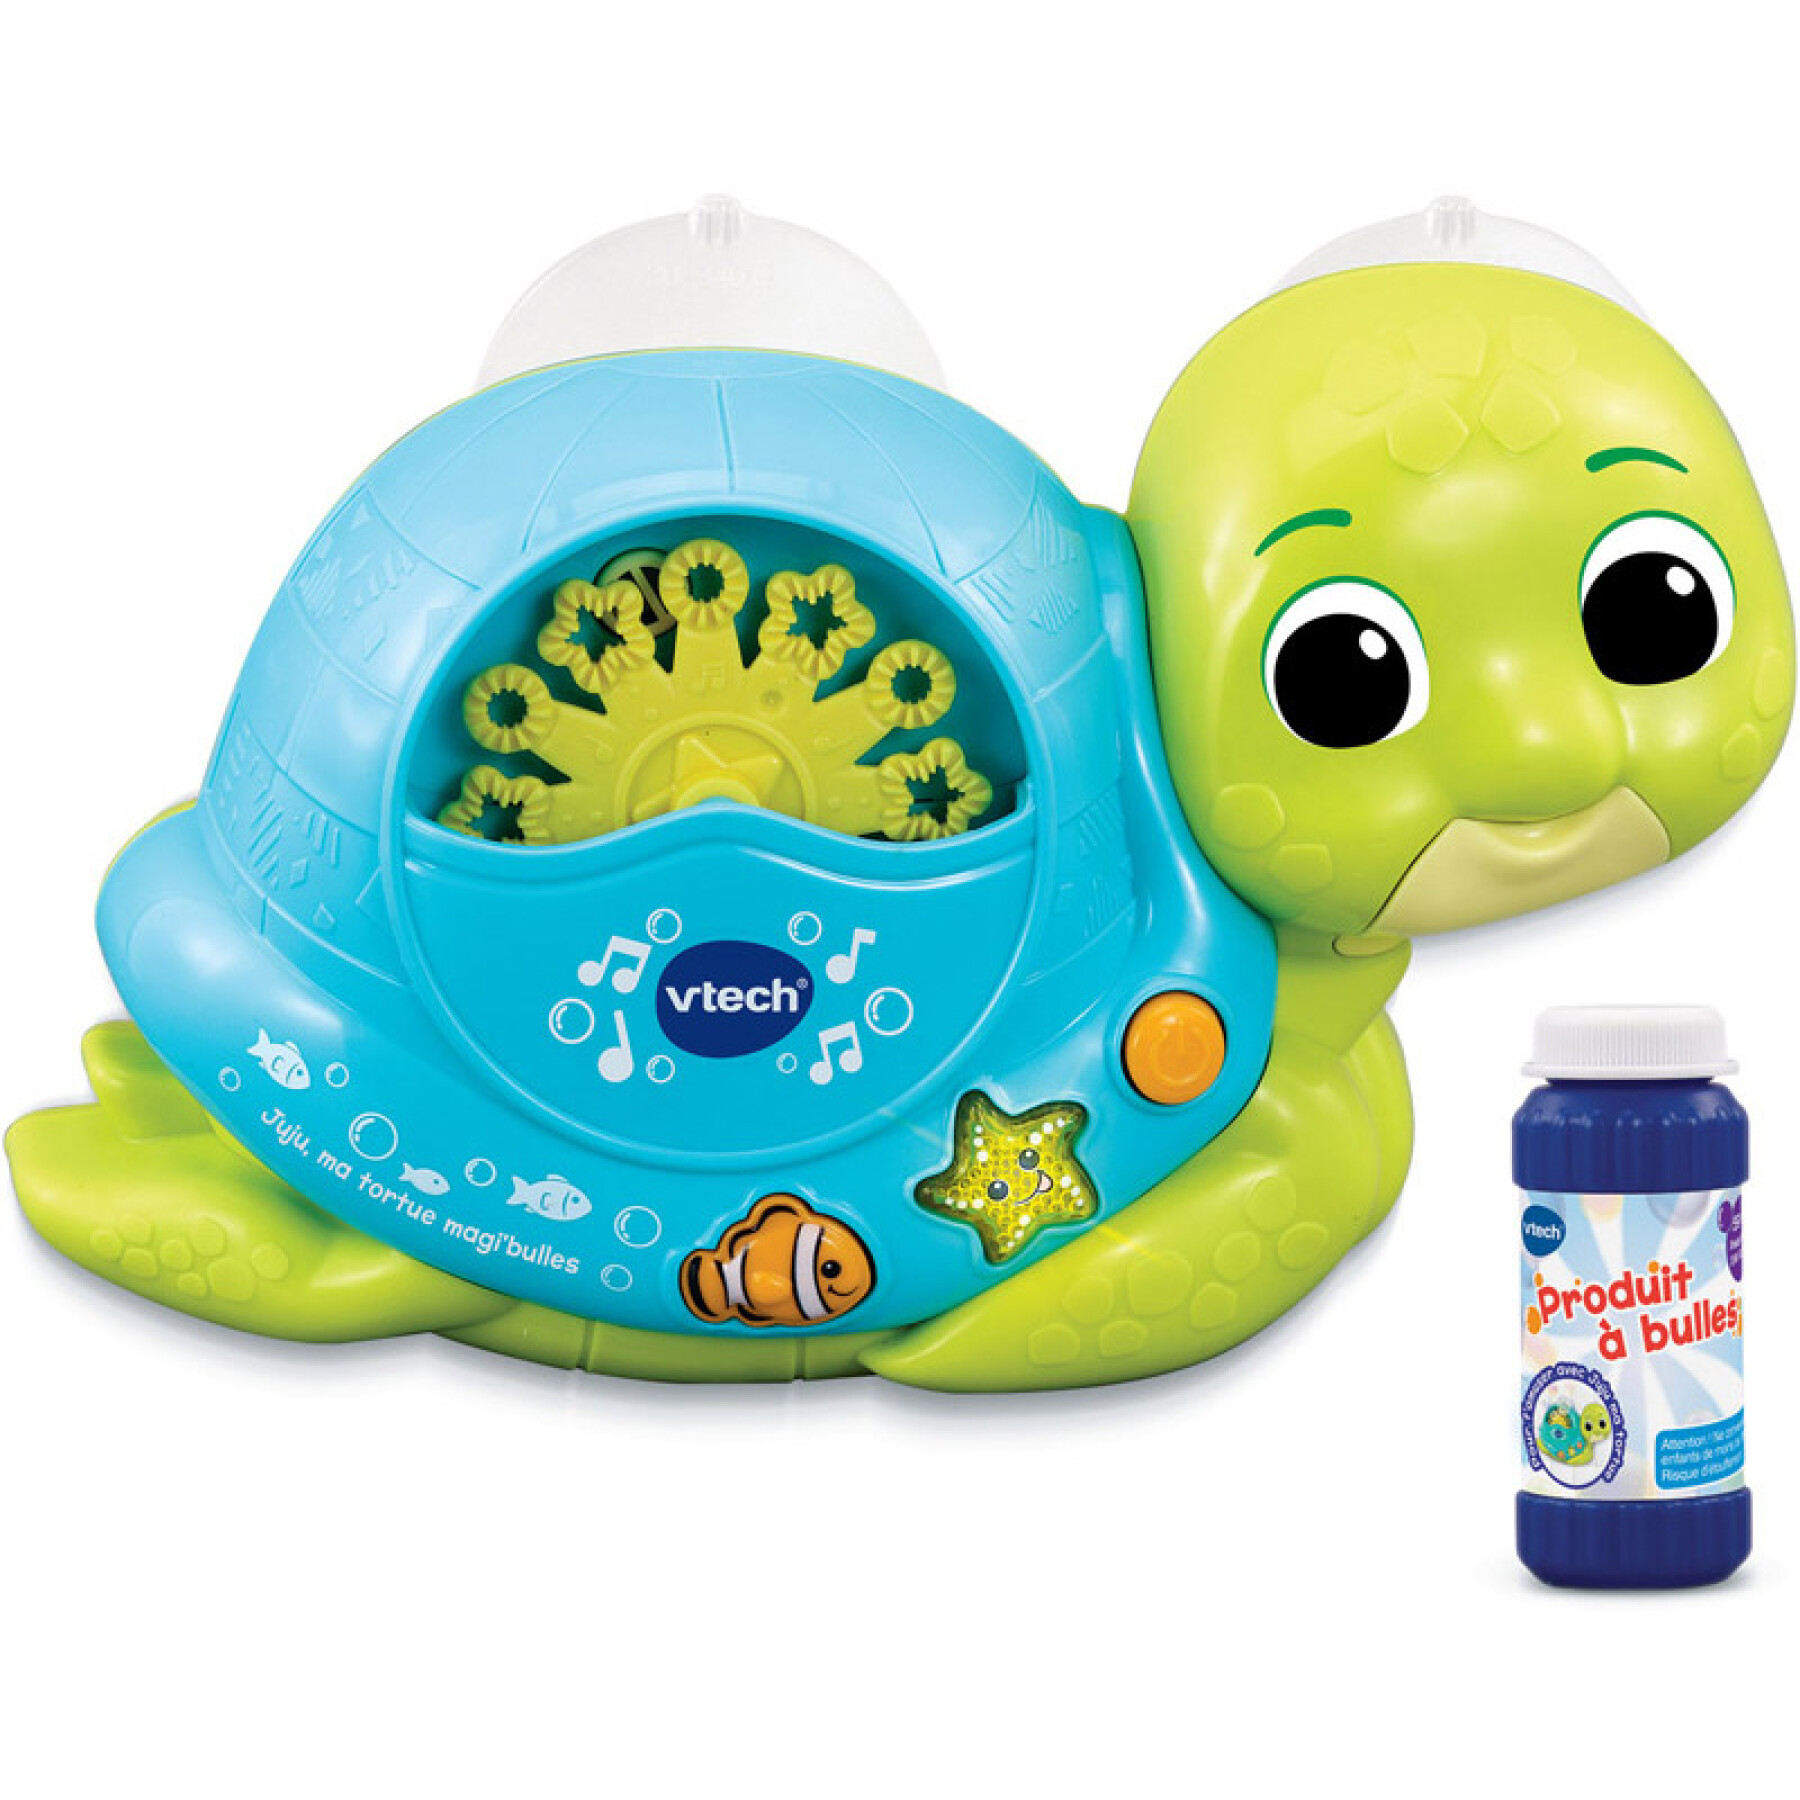 Early-learning games my turtle magi bubbles Vtech Electronics Europe Juju